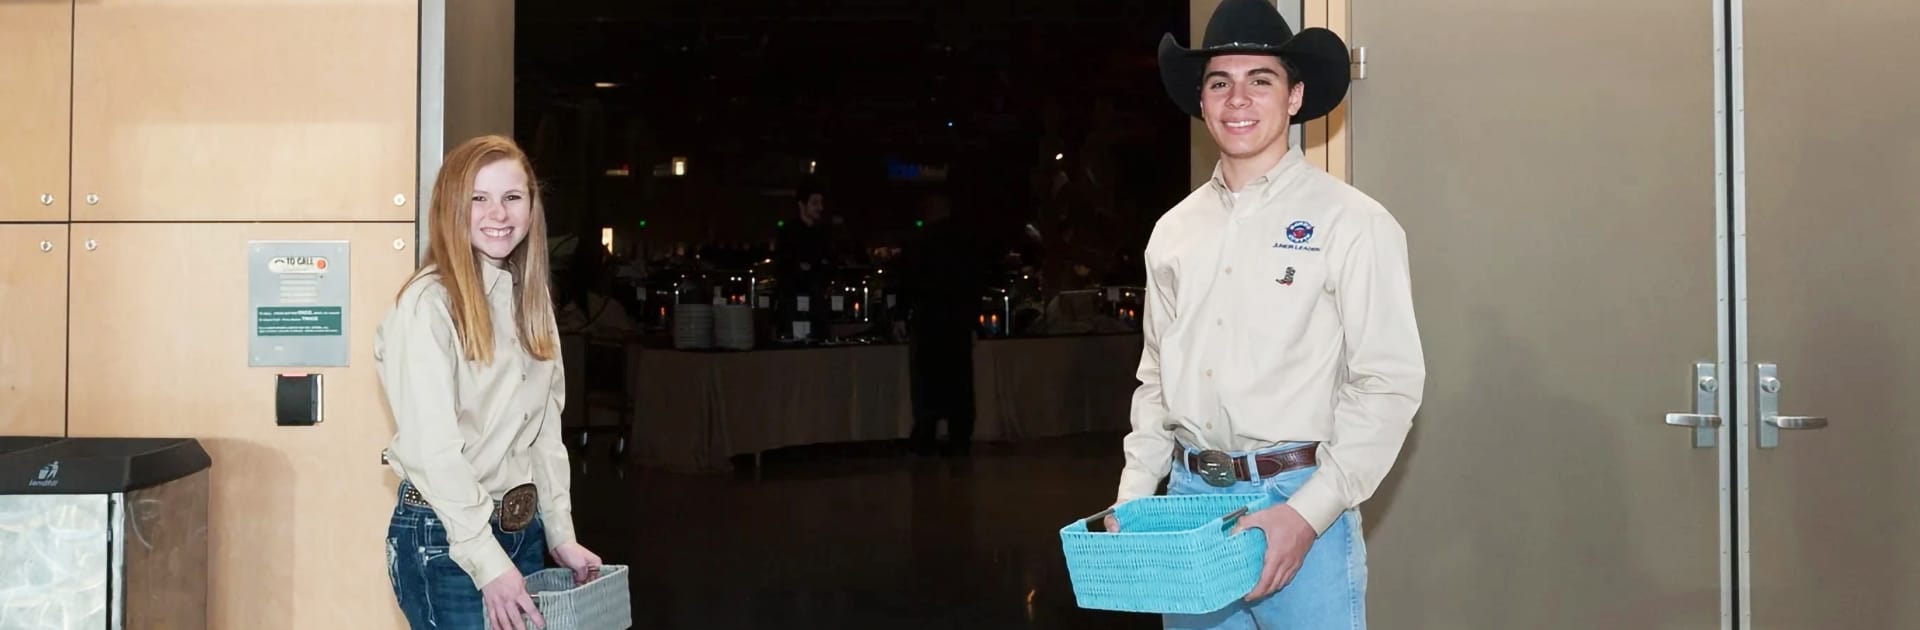 Two Rodeo Austin Junior Leaders smiling while taking tickets at the Rodeo Austin Gala